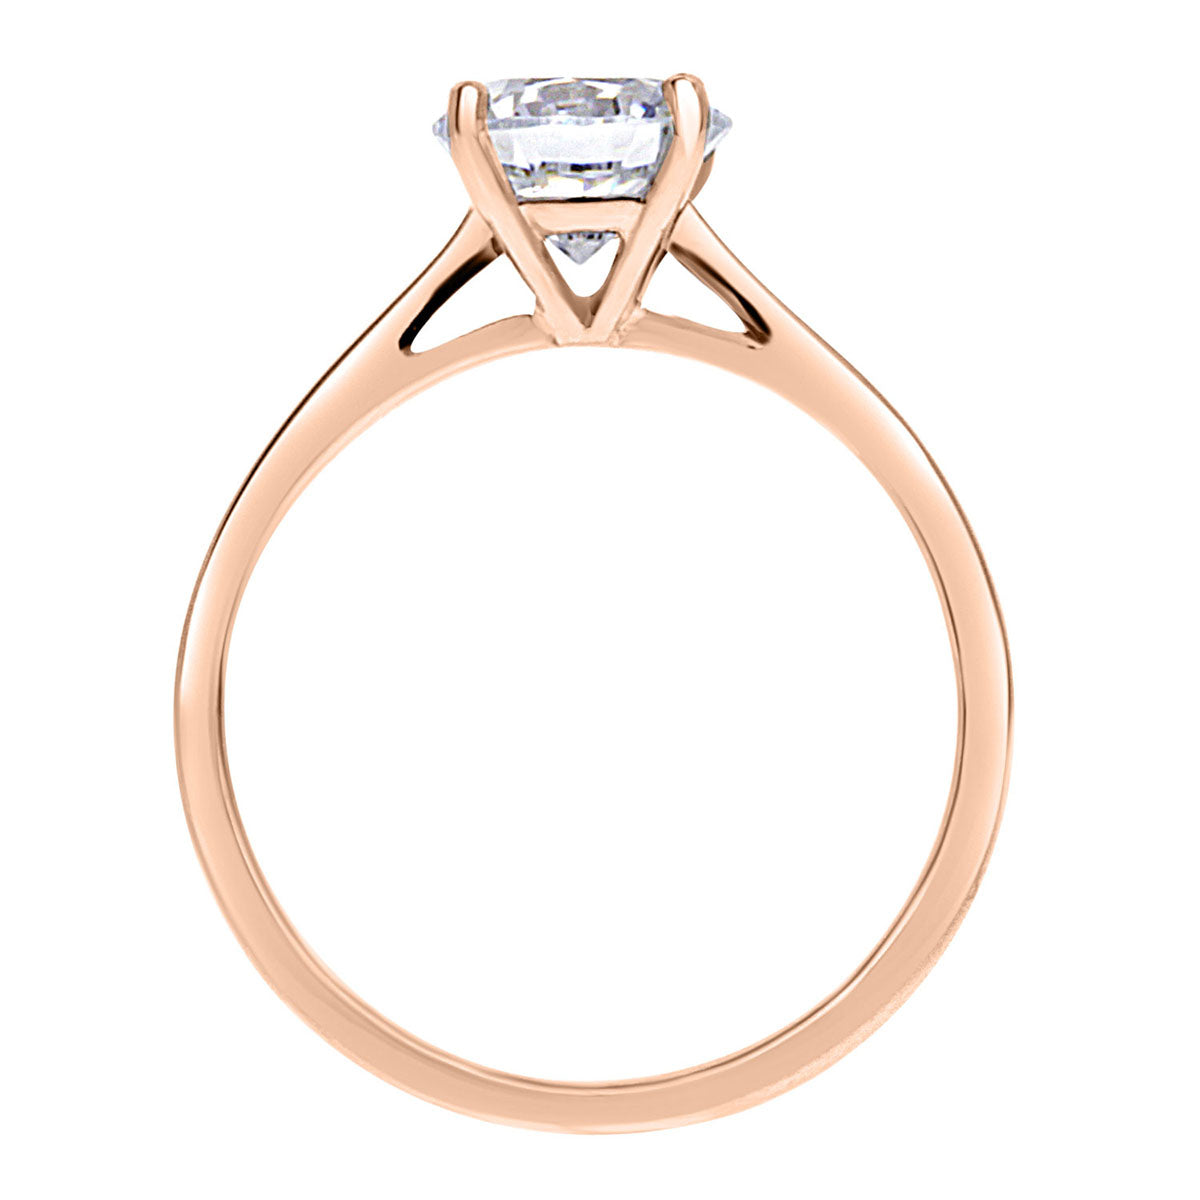 Solitaire Engagement Ring in rose gold pictured standing upright